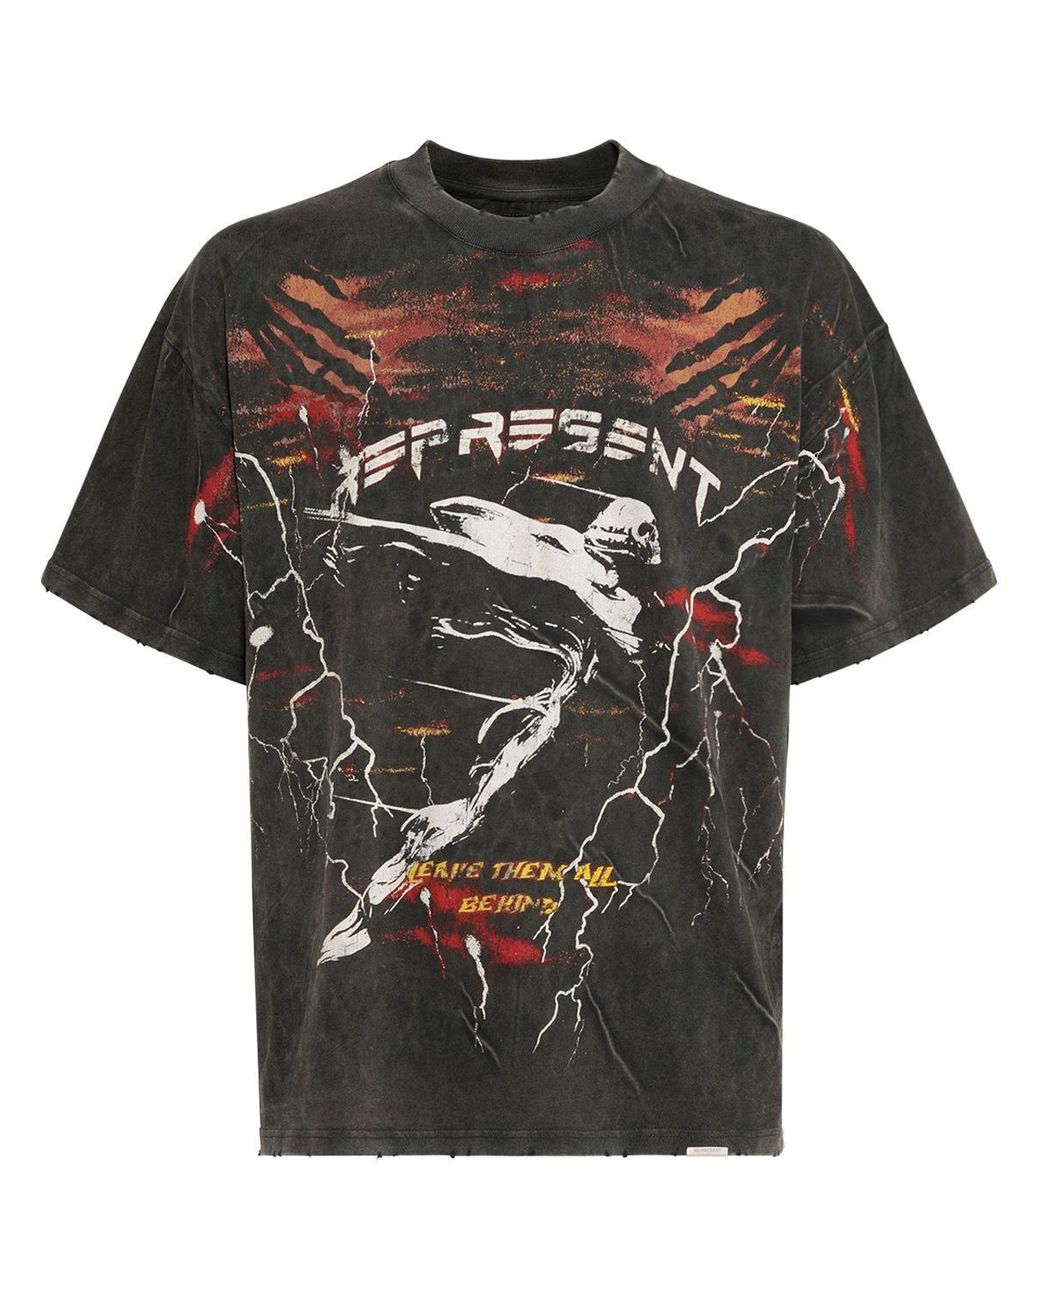 Represent Over Spirit Angel Printed Cotton T-shirt in Gray for Men - Lyst